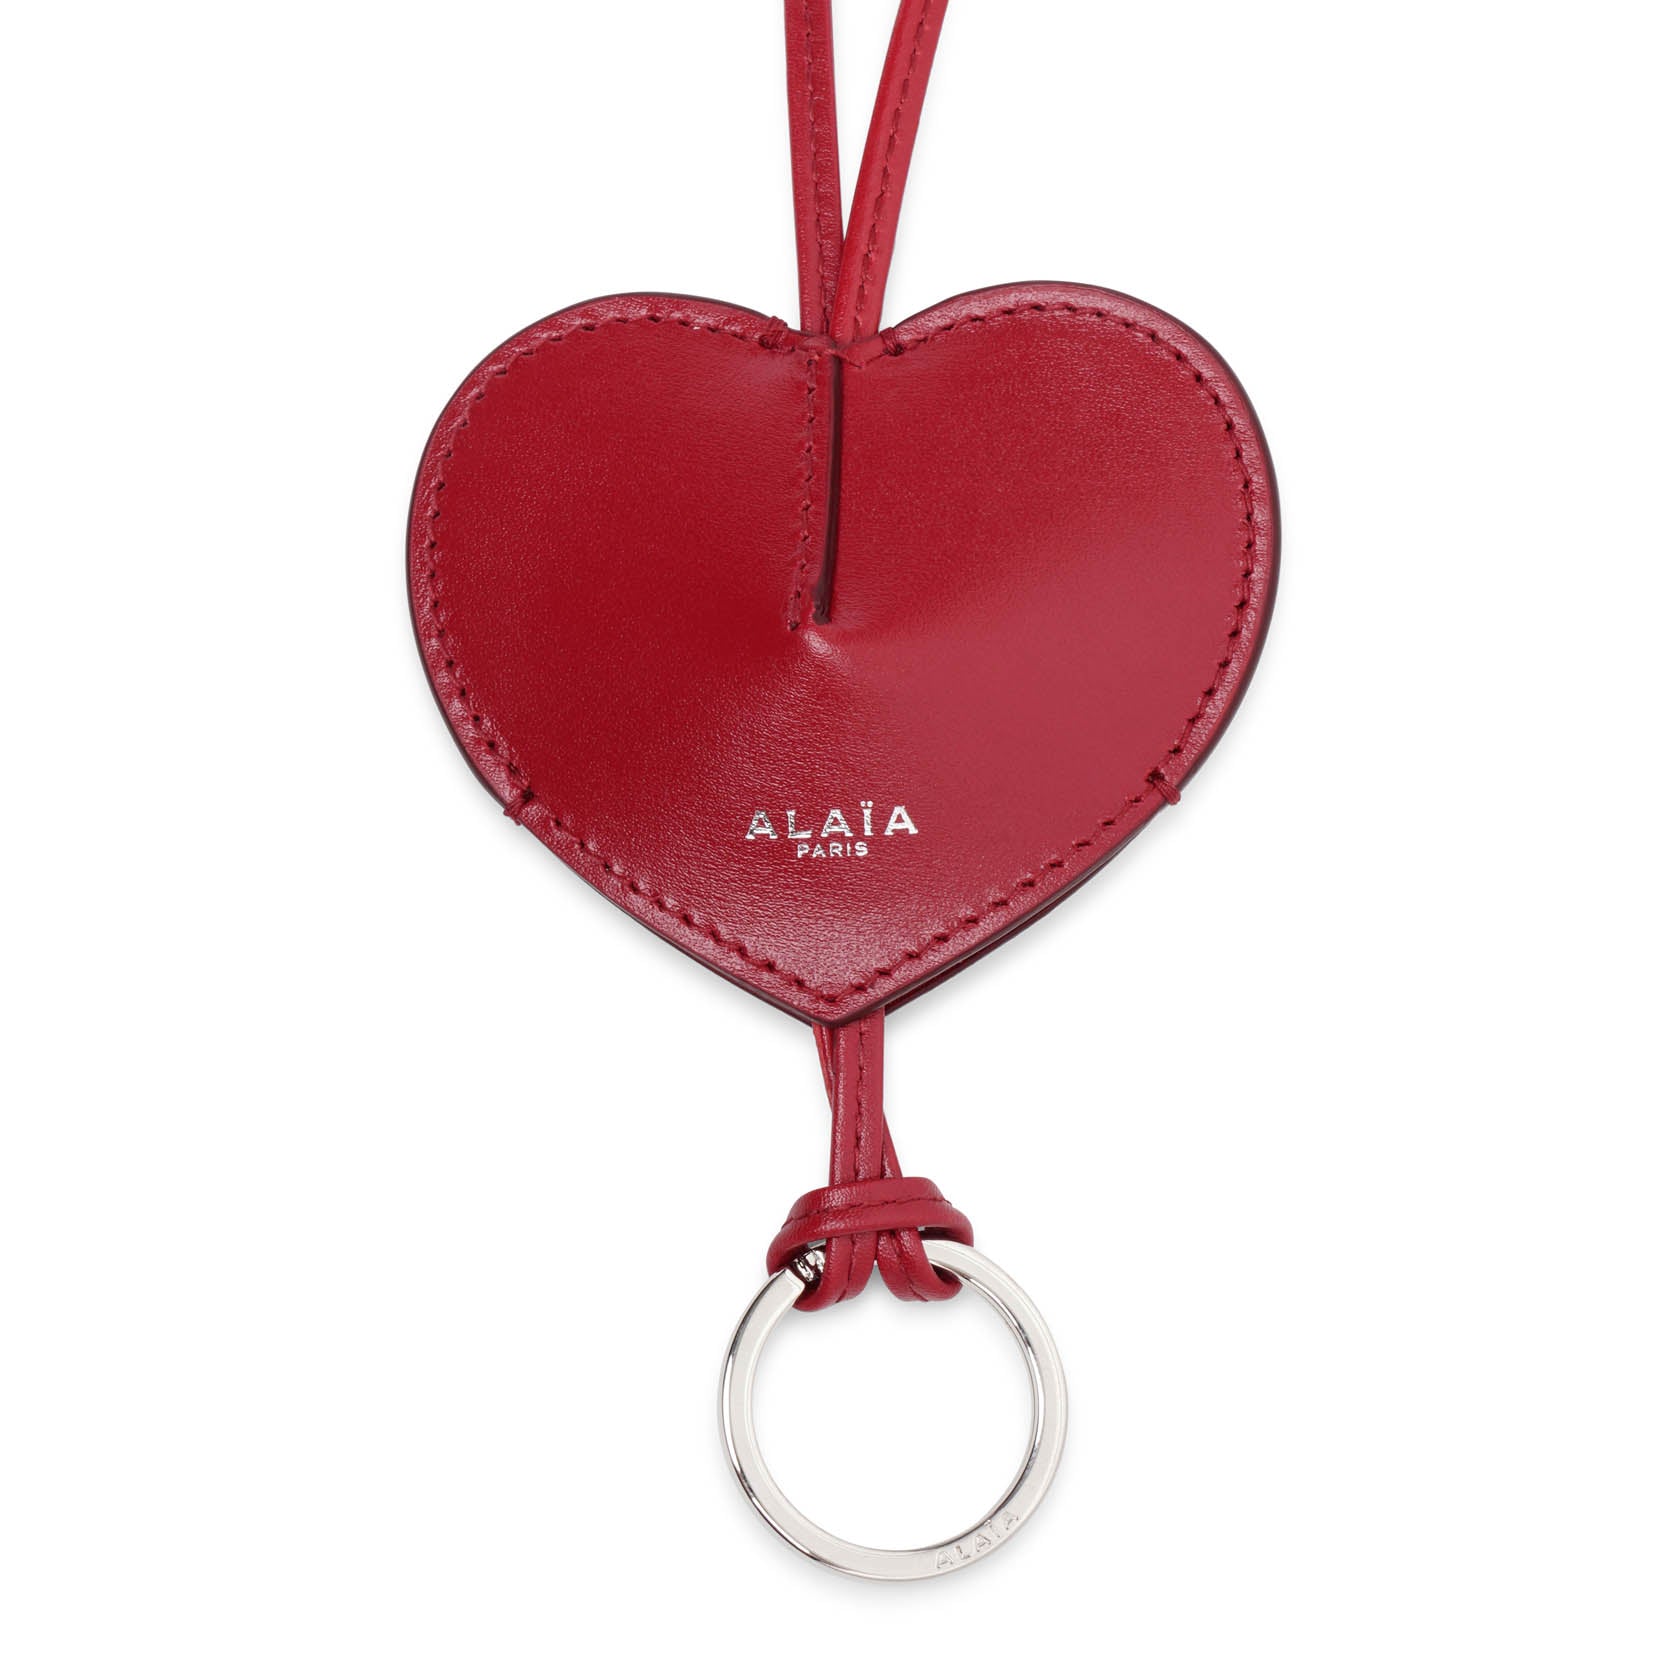 Le Coeur Cloche red leather